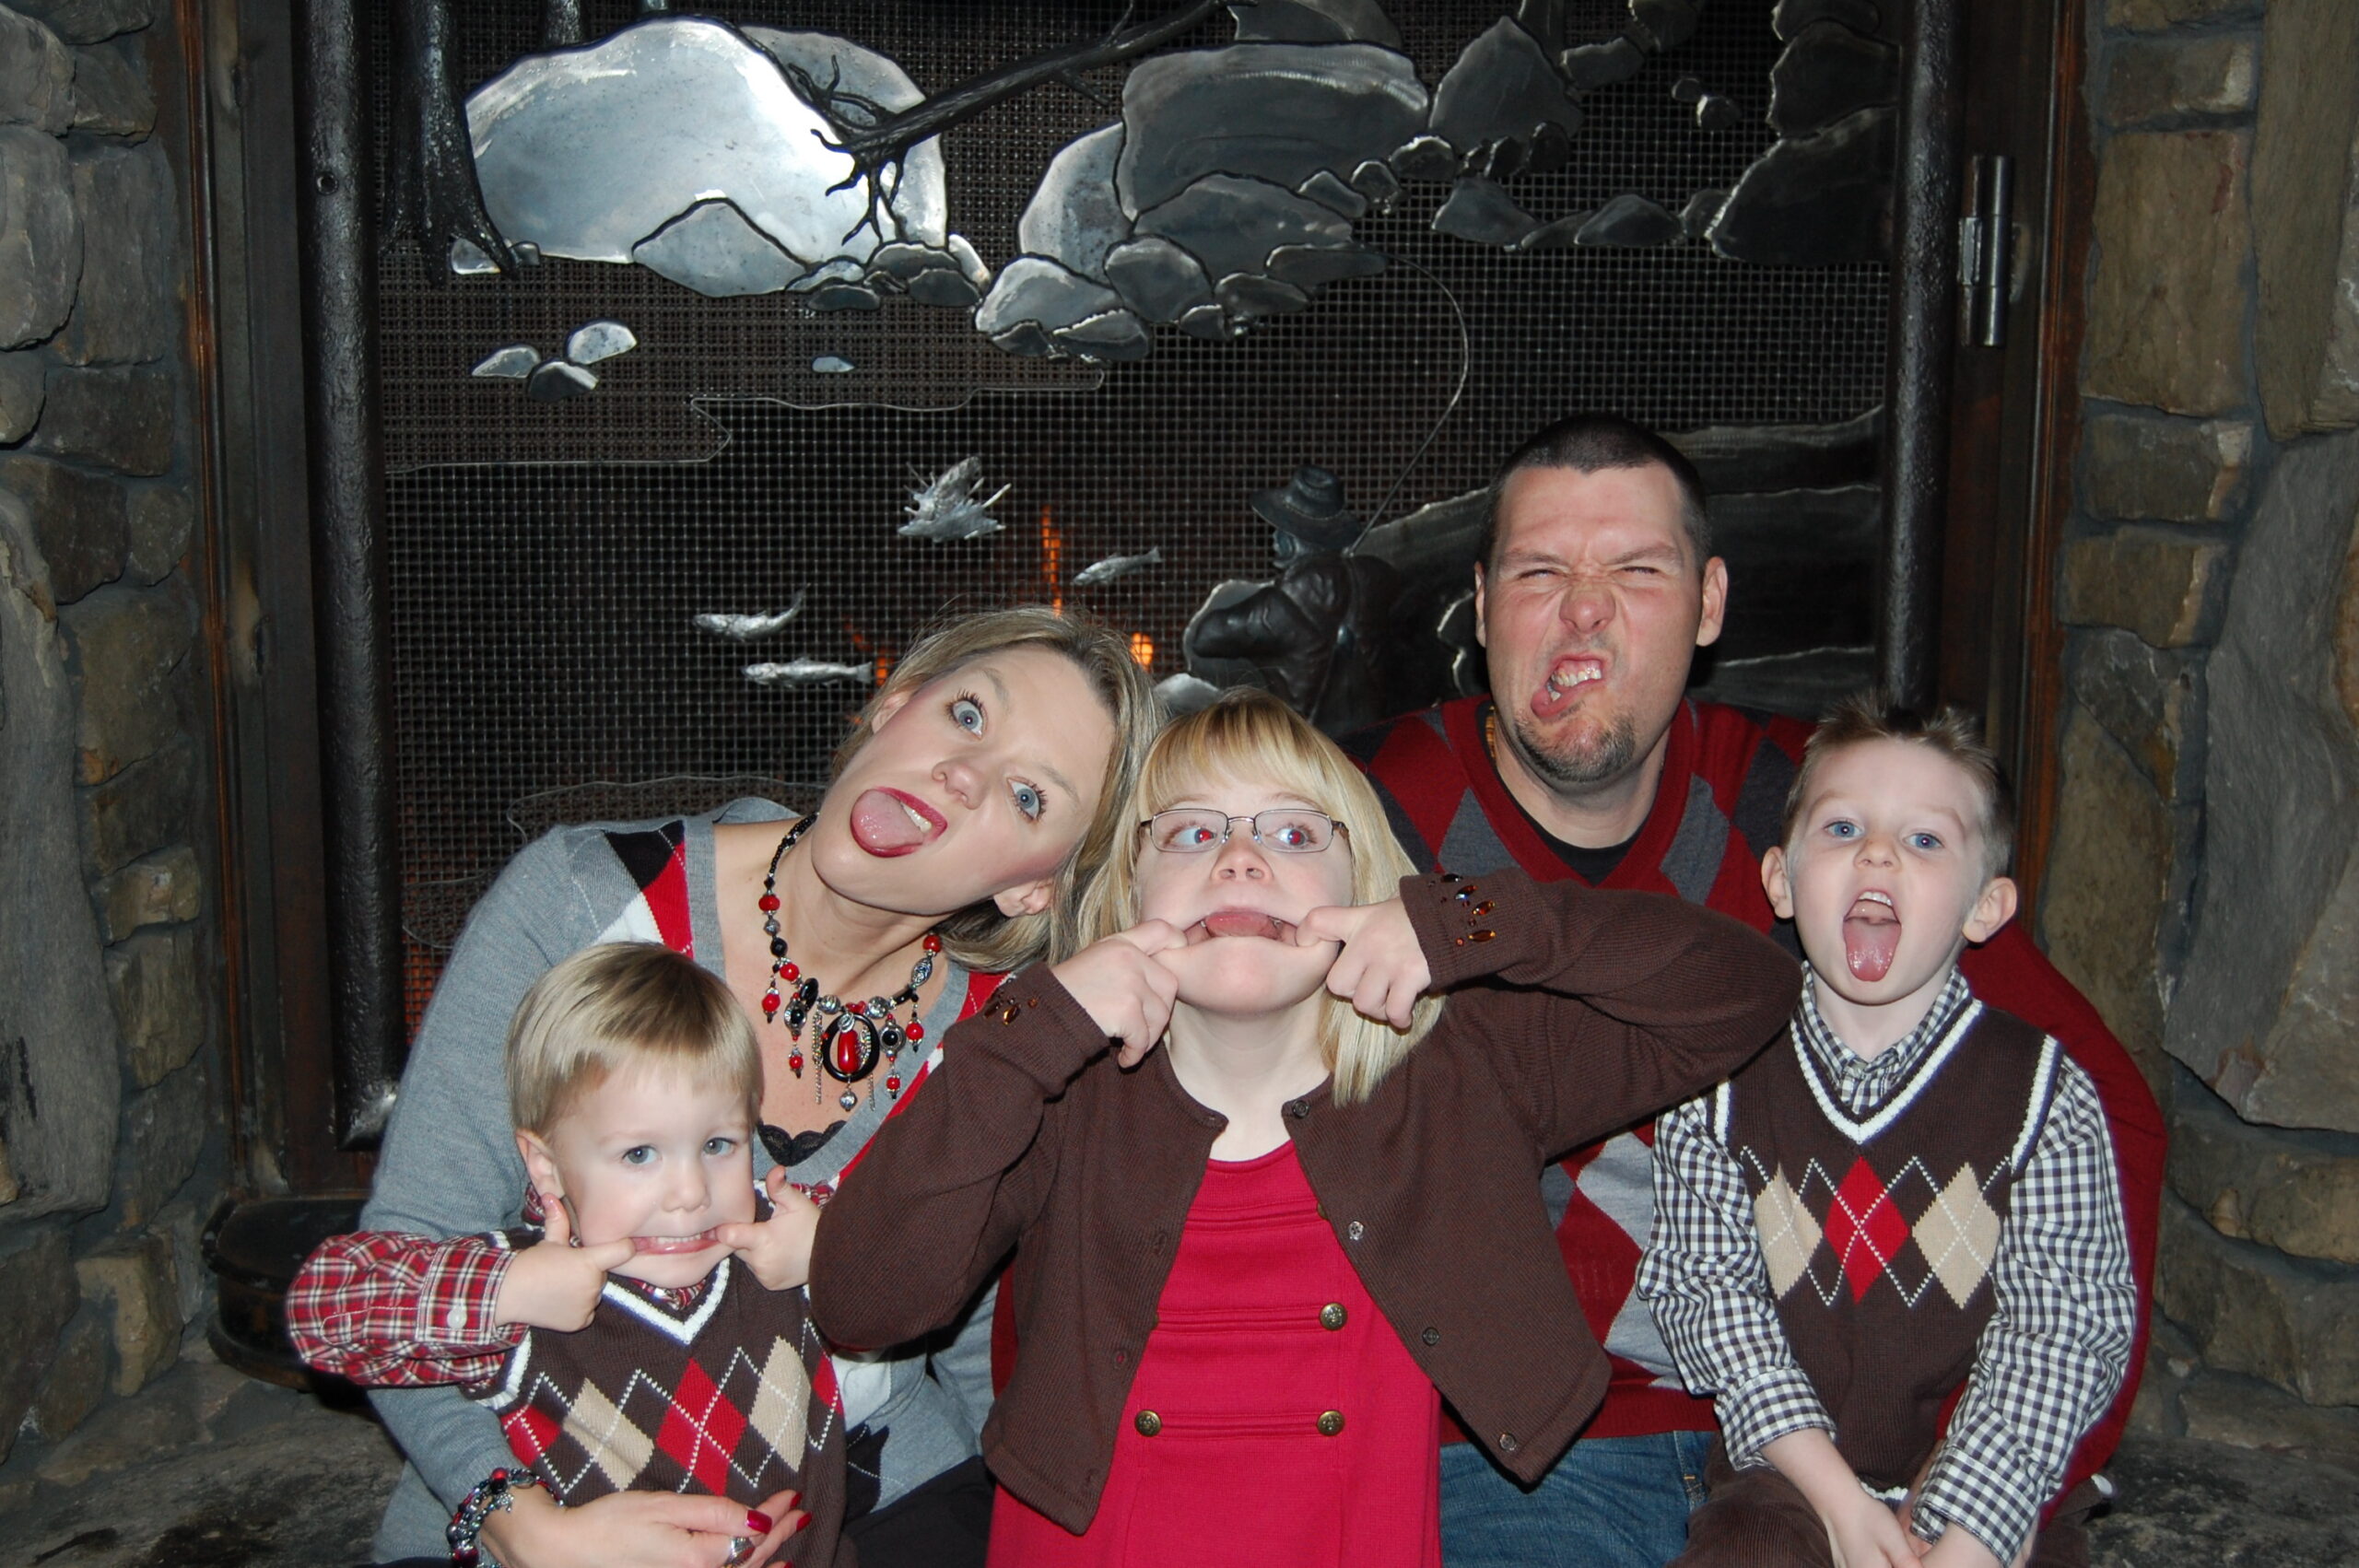 Shannon, her three children, and her husband making silly faces for a photo.